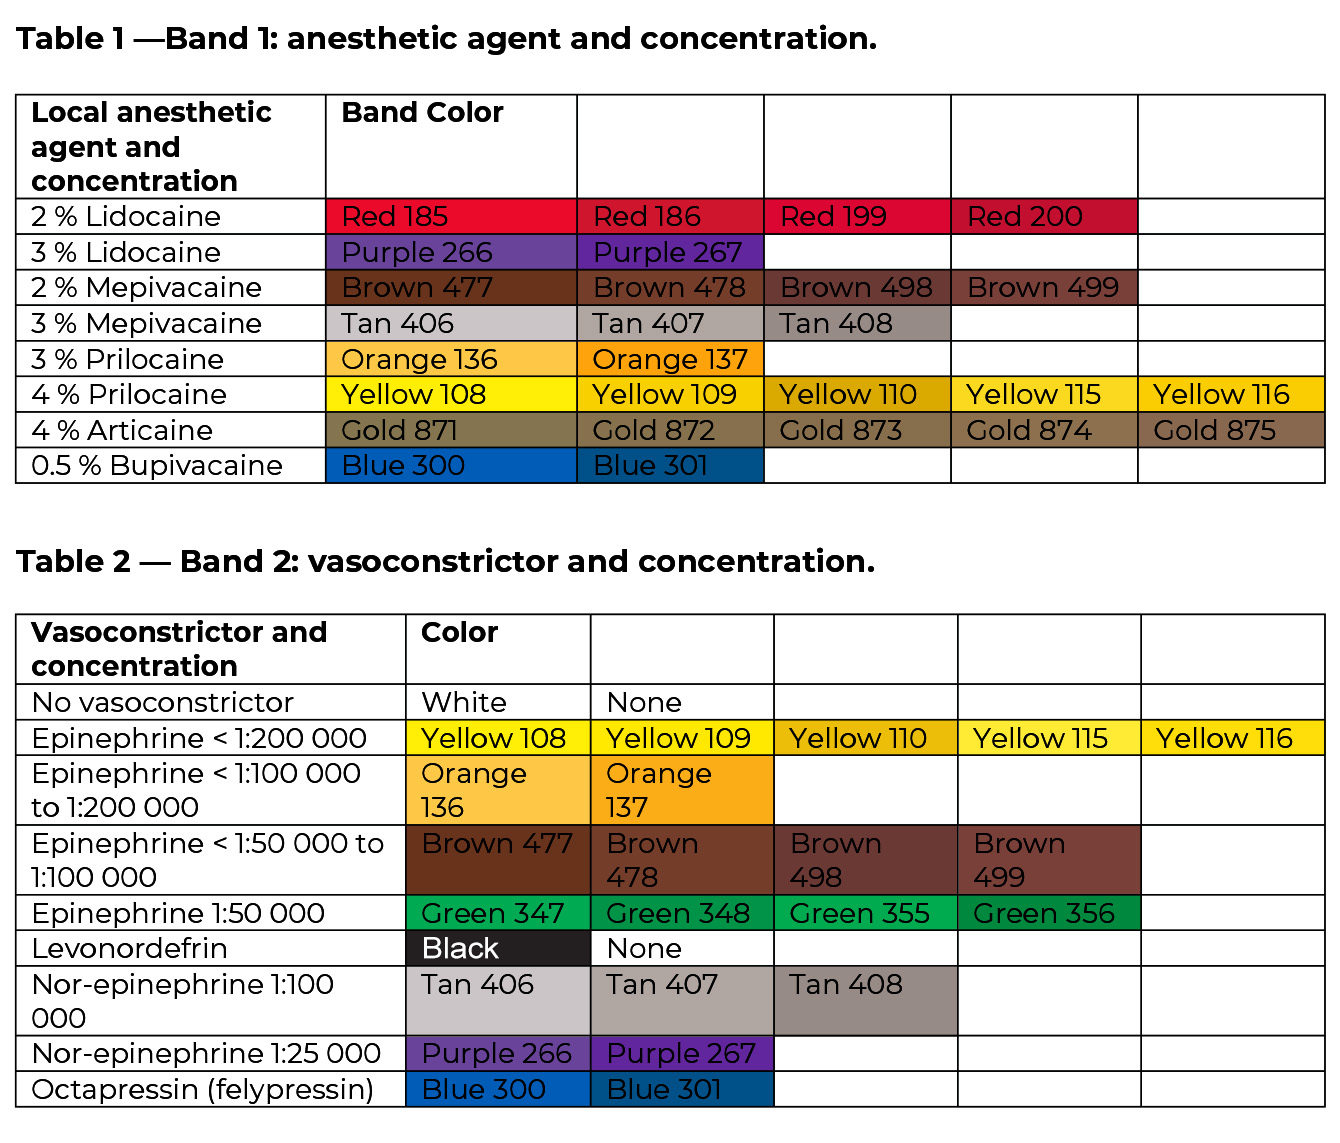 An image of, "Table 1 — Band 1: anesthetic agent and concentration" and an image of, "Table 2 — Band 2: vasoconstrictor and concentration."